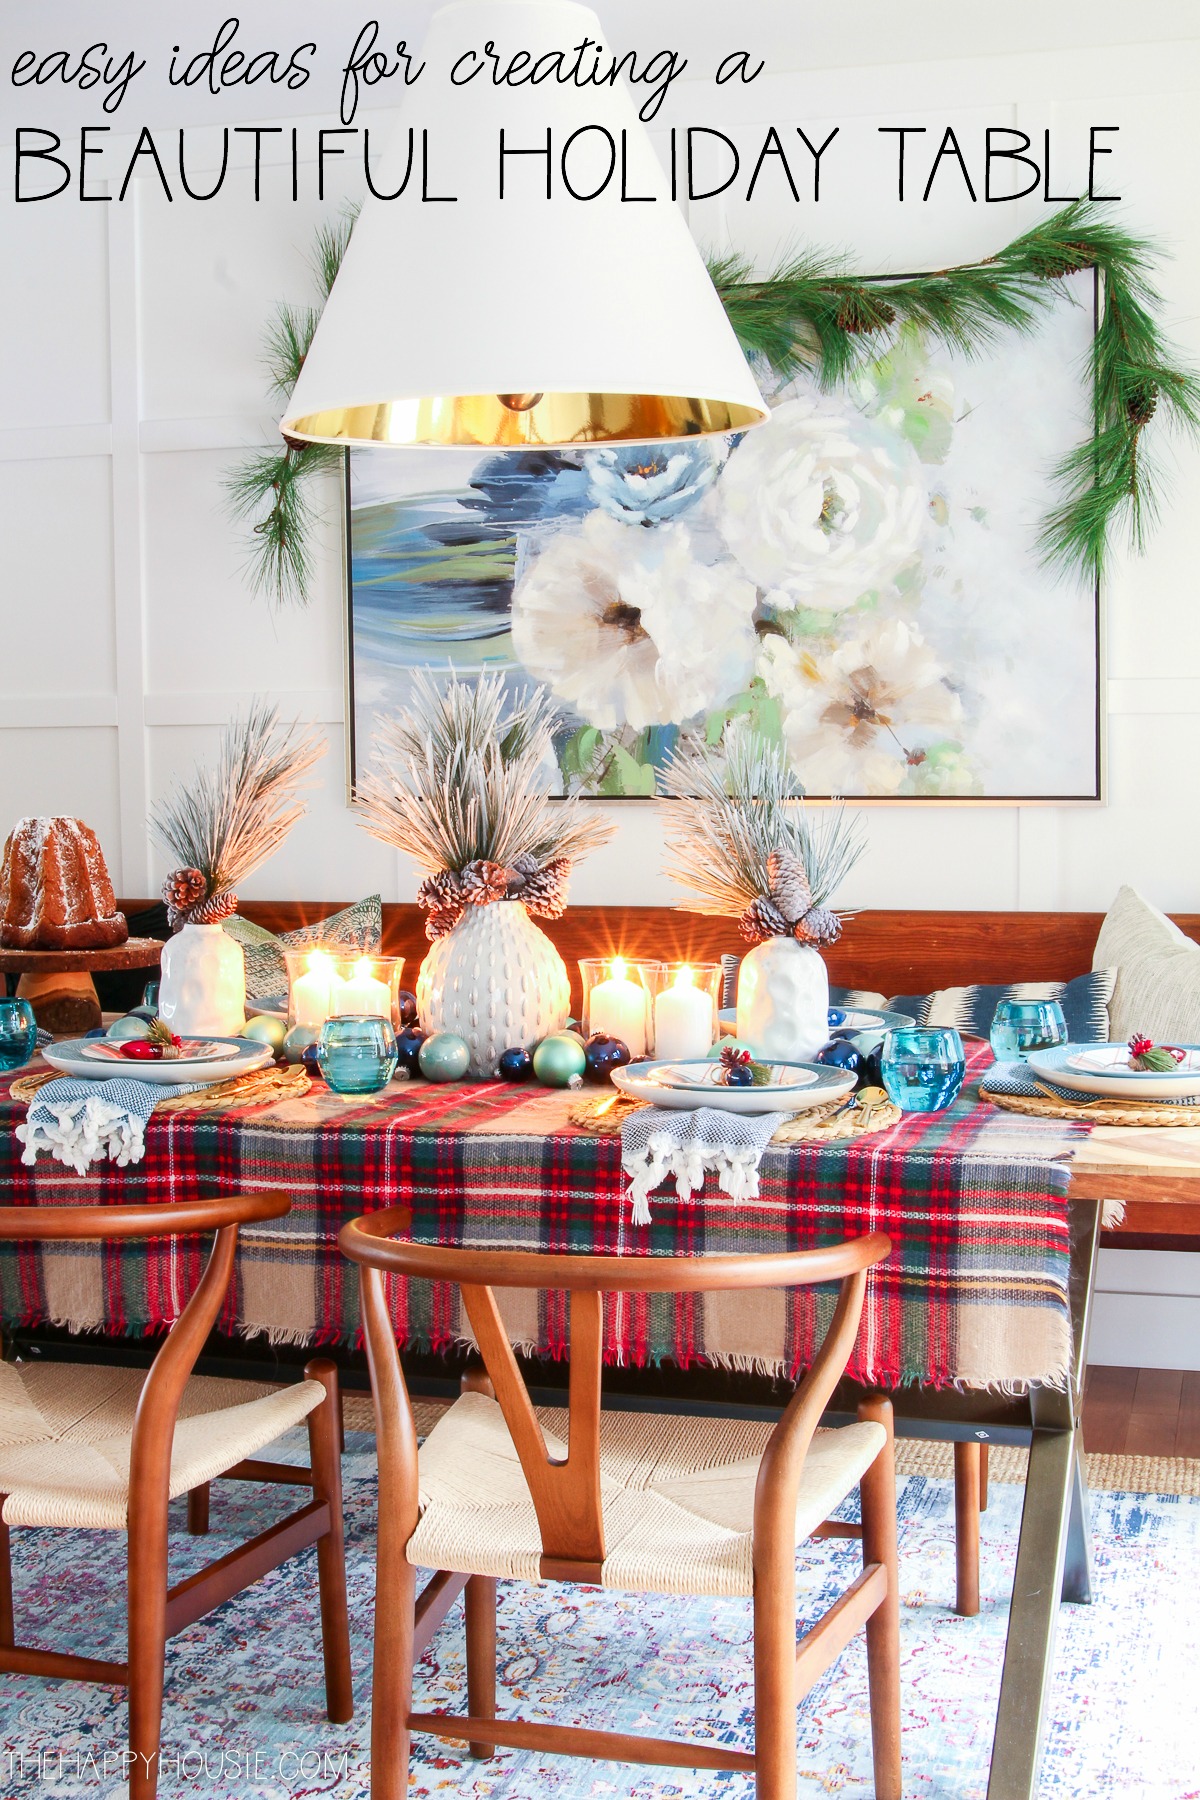 Beautiful Holiday Table graphic.